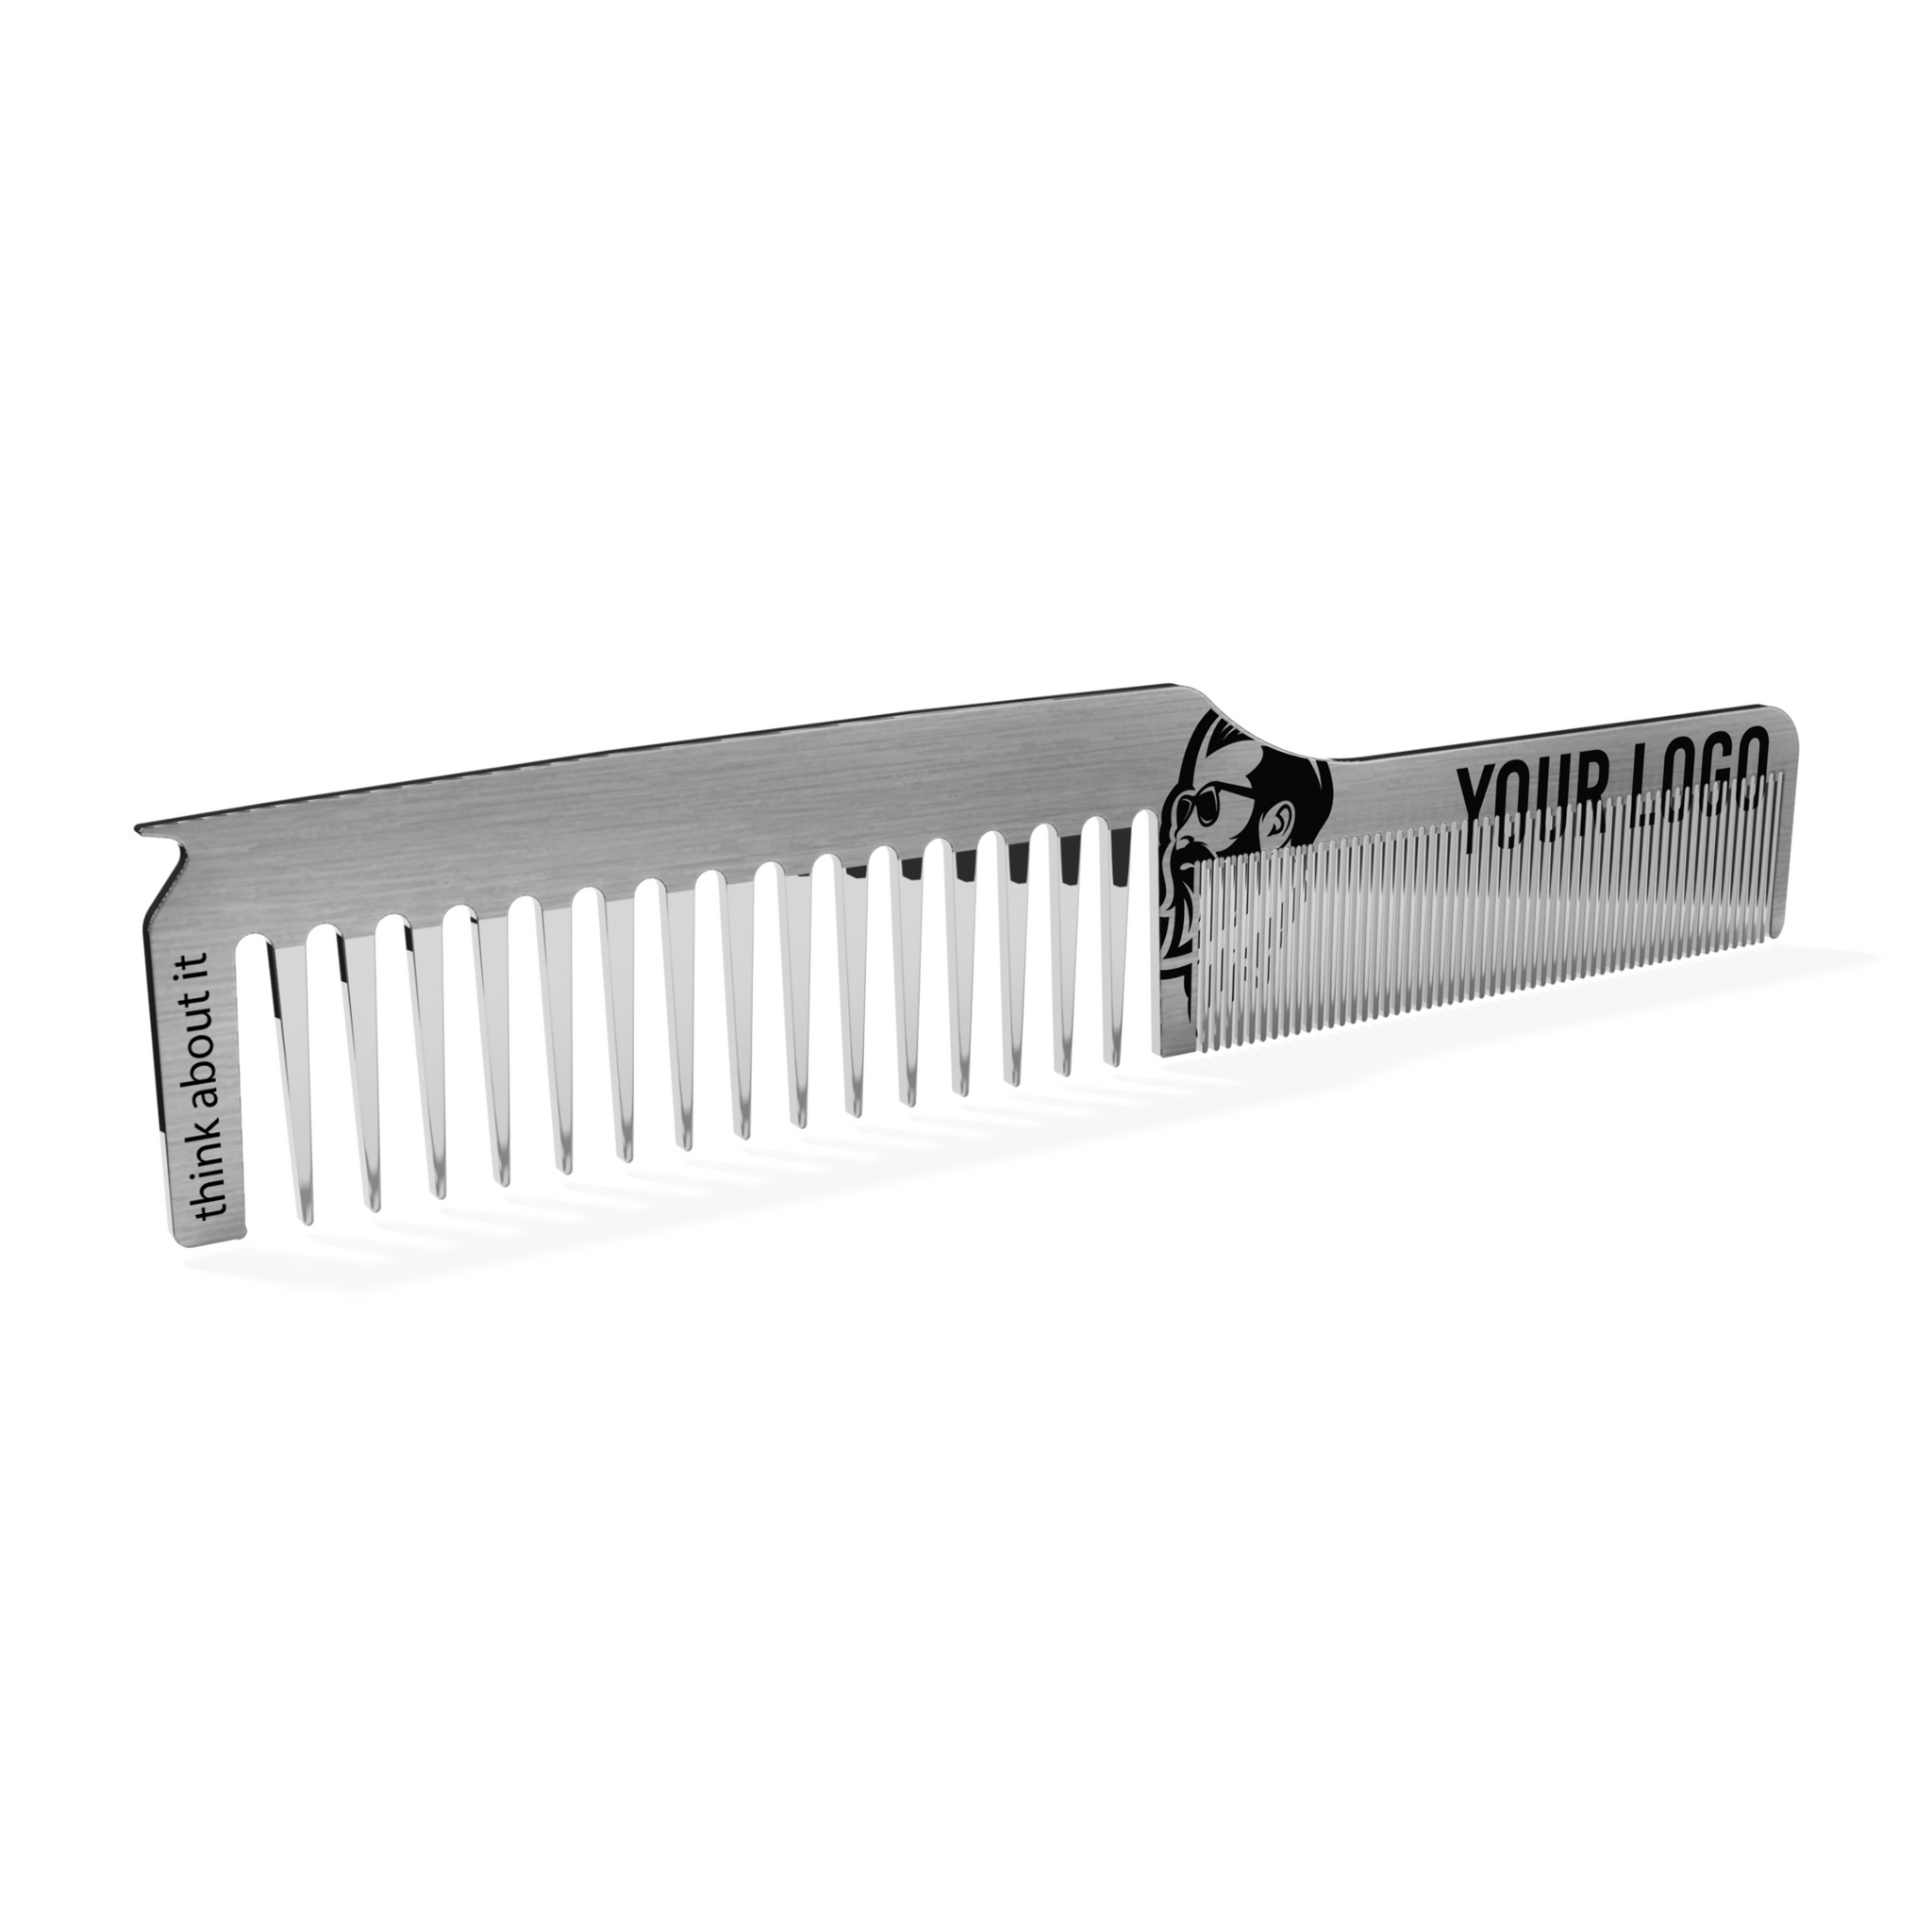 Hair & Beard Comb ~ MPN-DT2-HR Hair Styling Wholesale White Label Hair Styling